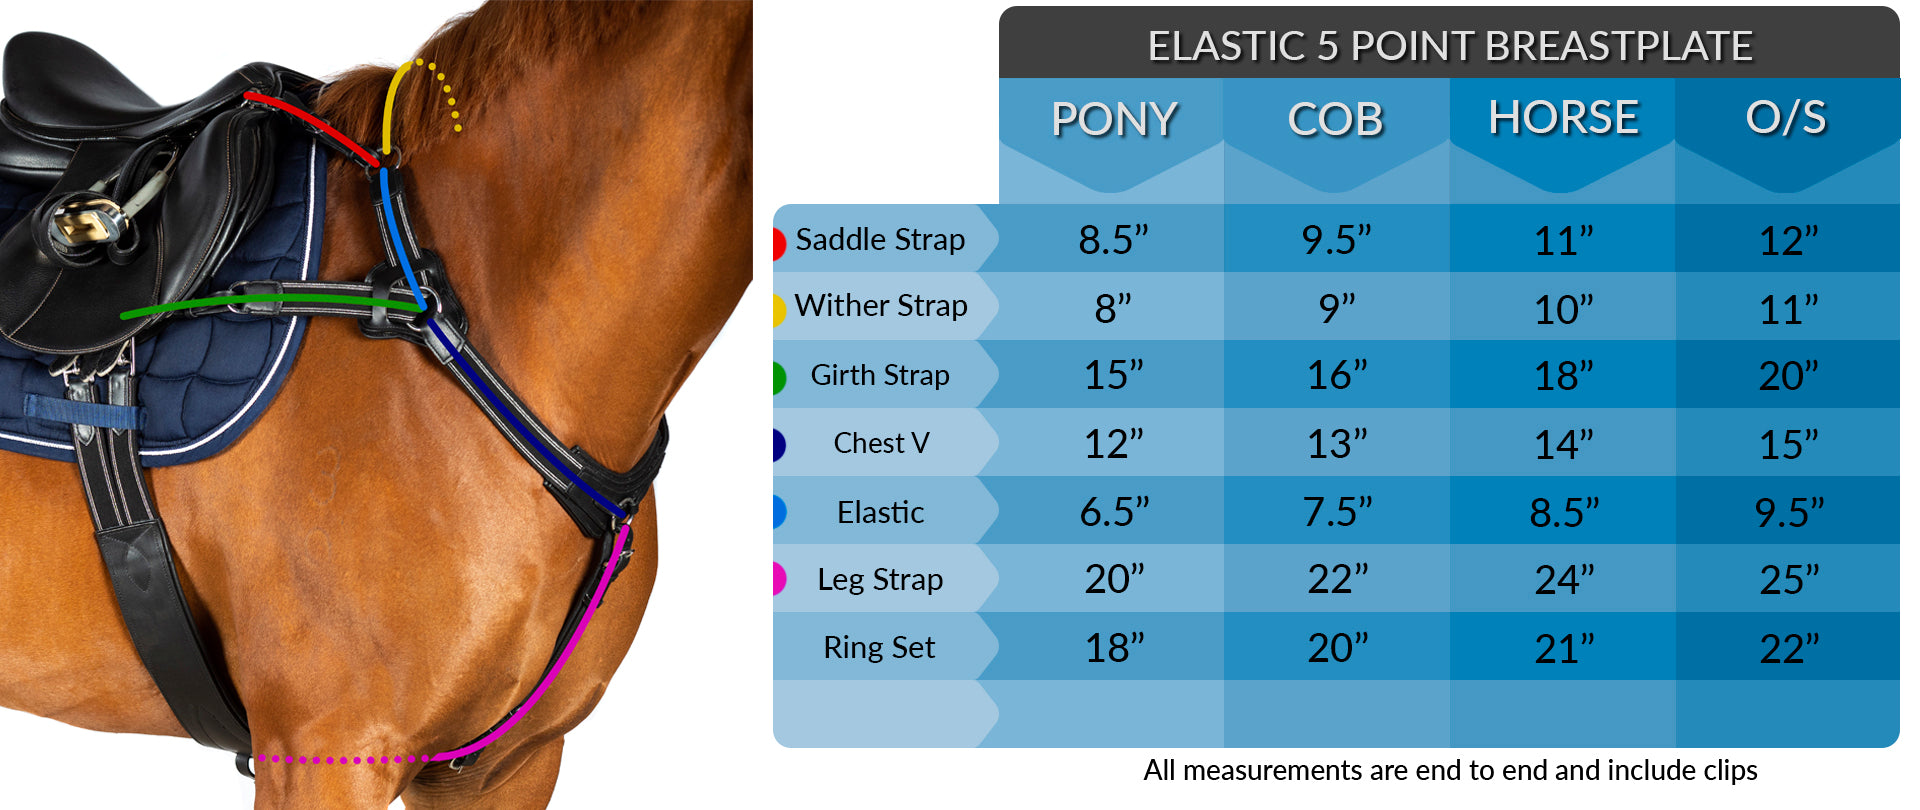 5 POINT BREASTPLATE MEASUREMENT